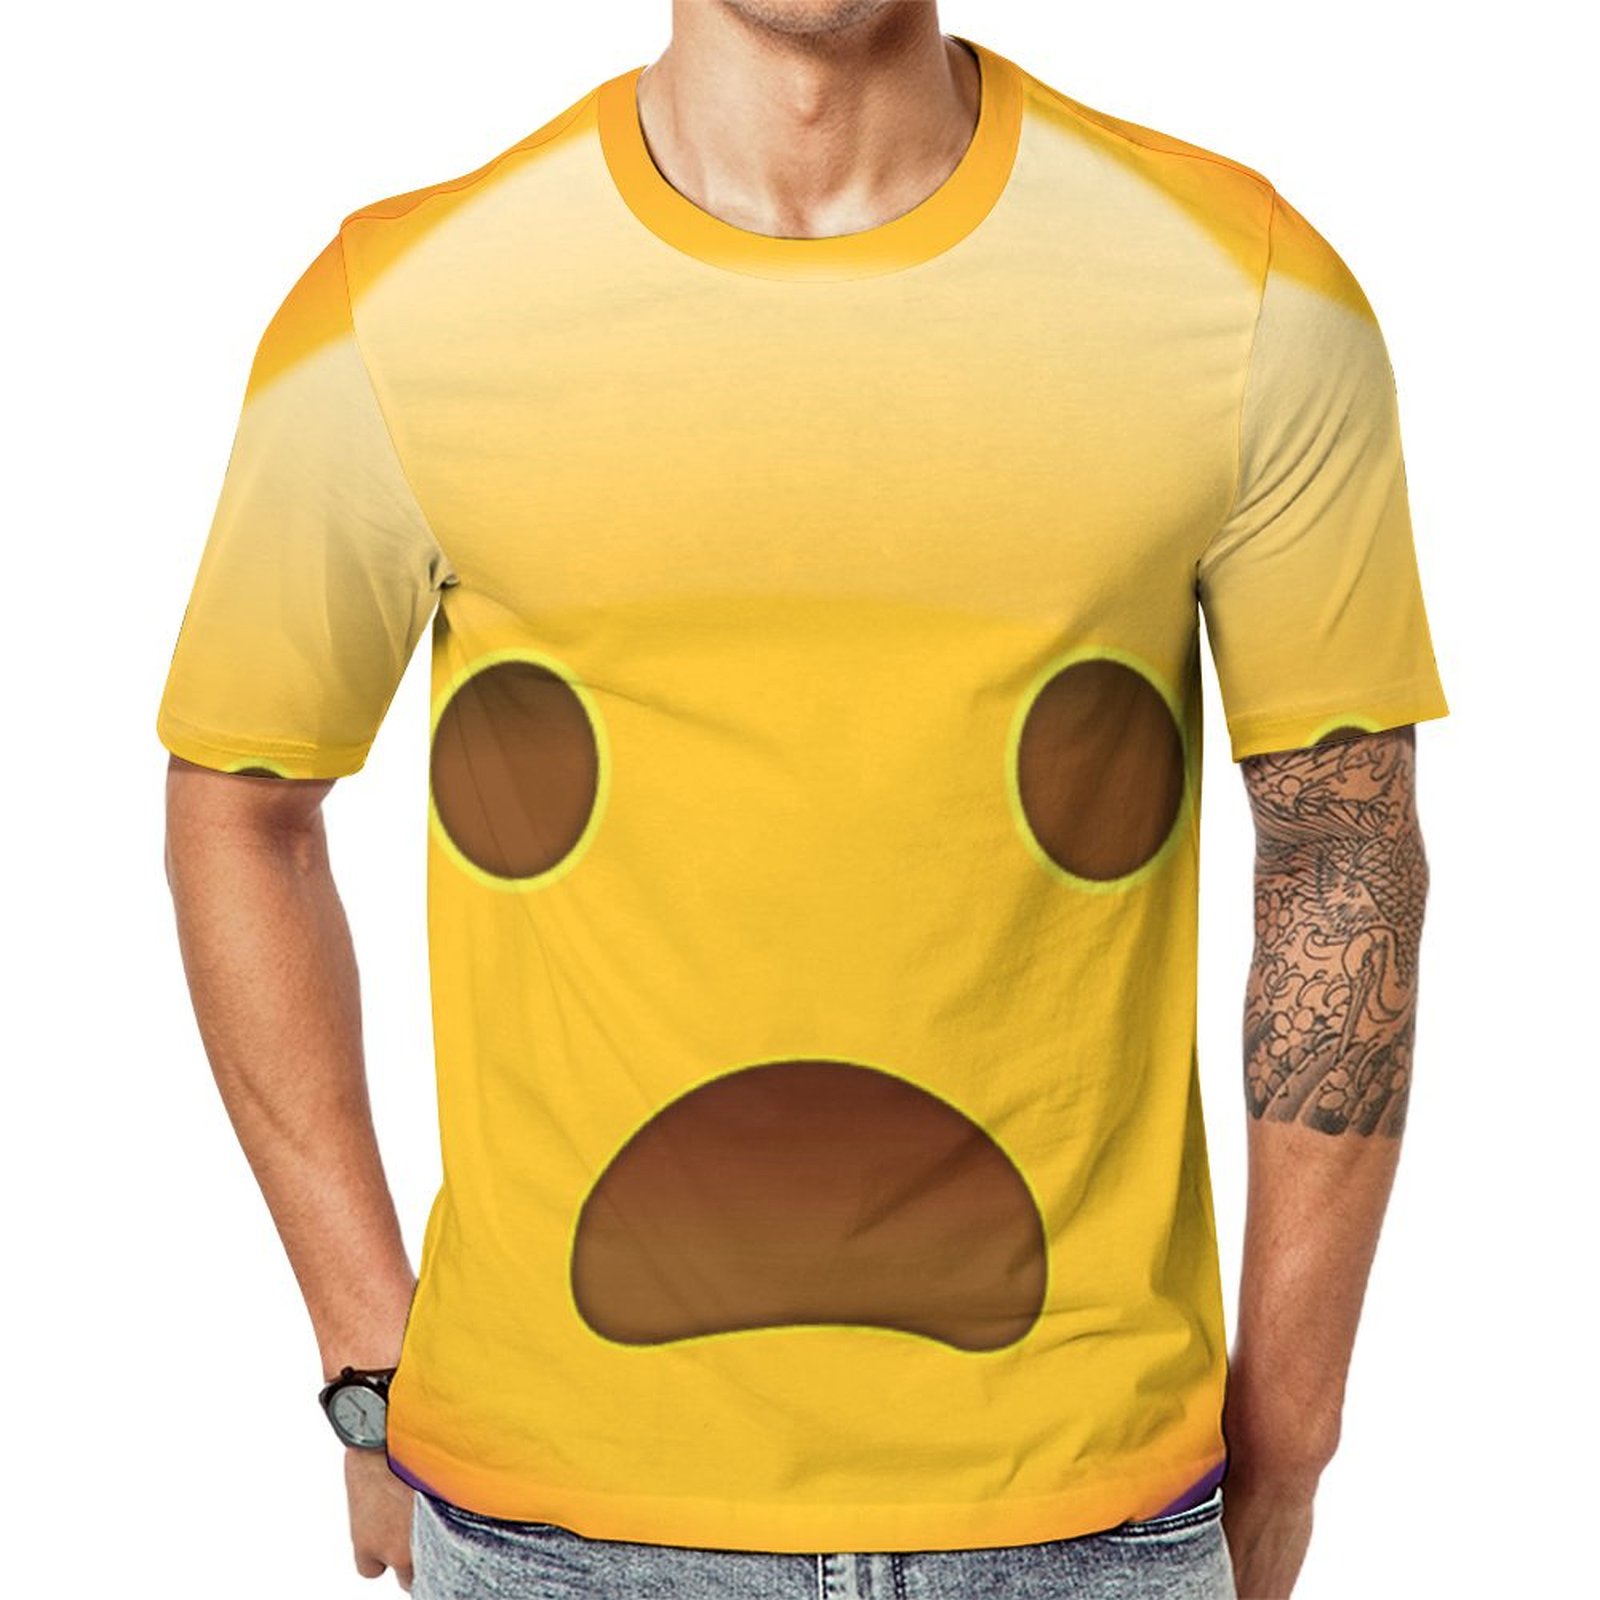 Frowning Face With Open Mouth Emoji Short Sleeve Print Unisex Tshirt Summer Casual Tees for Men and Women Coolcoshirts